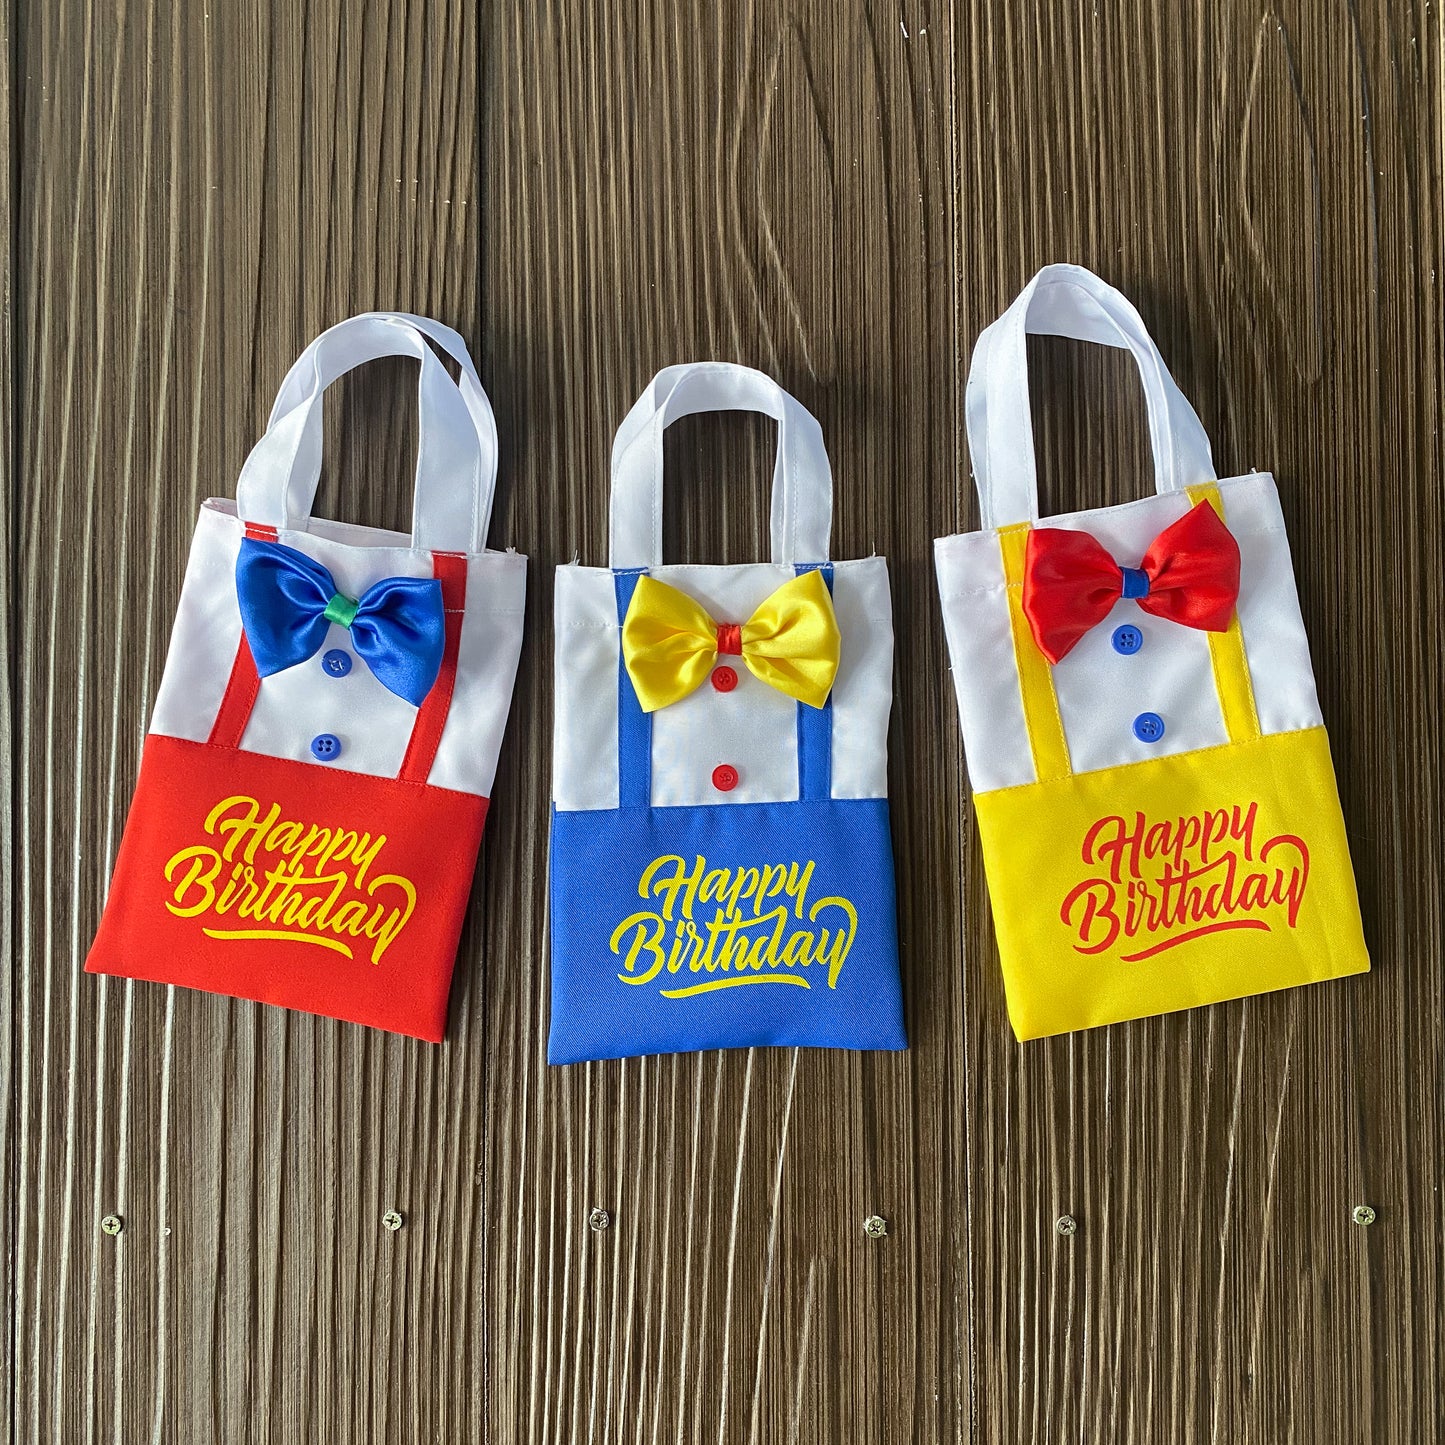 Happy Birthday Candy Bags, Birthday Party Favor Bags, Little Man Gift Bags, Little Man First Birthday, Little Man Party Decorations